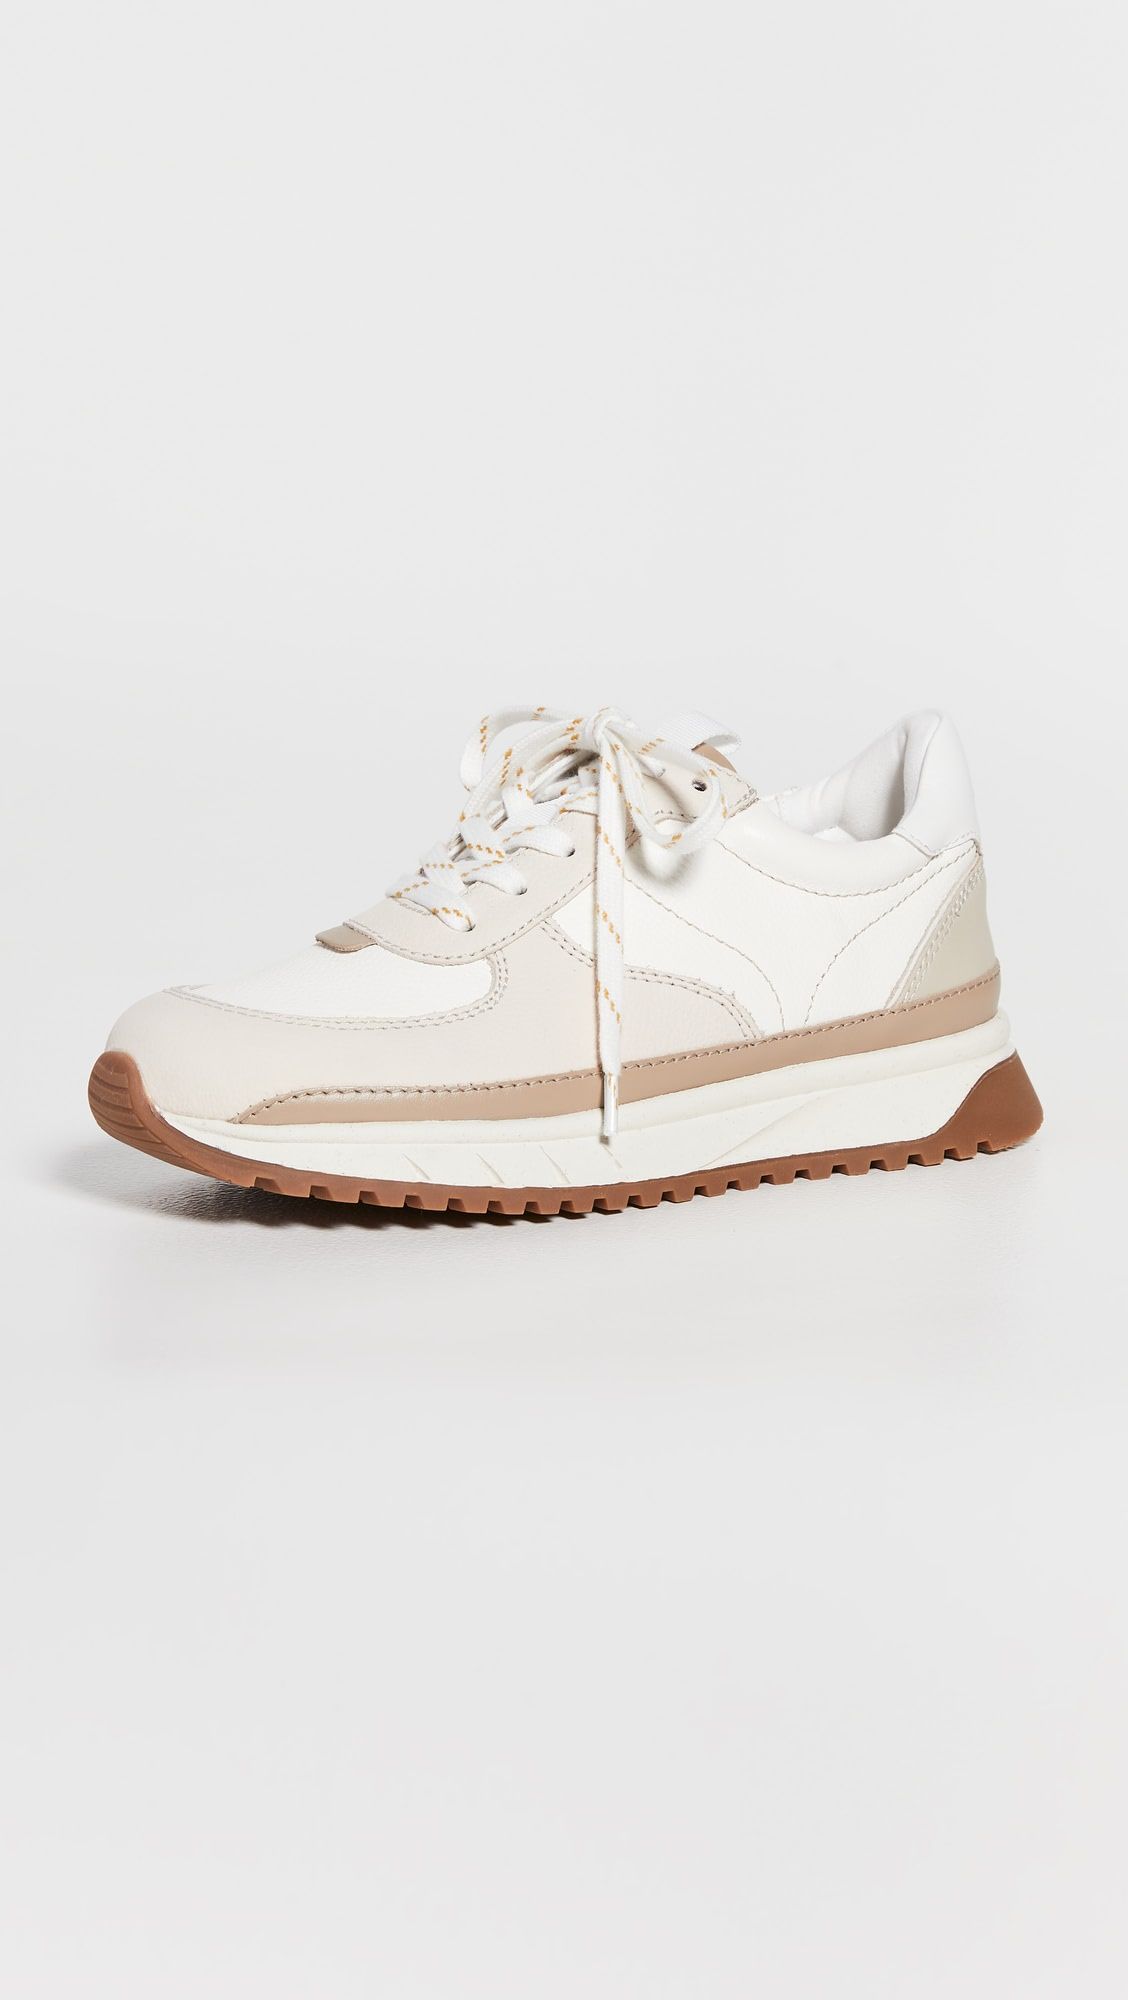 Madewell Kickoff Trainer Sneakers in Neutral Colorblock Leather | Shopbop | Shopbop